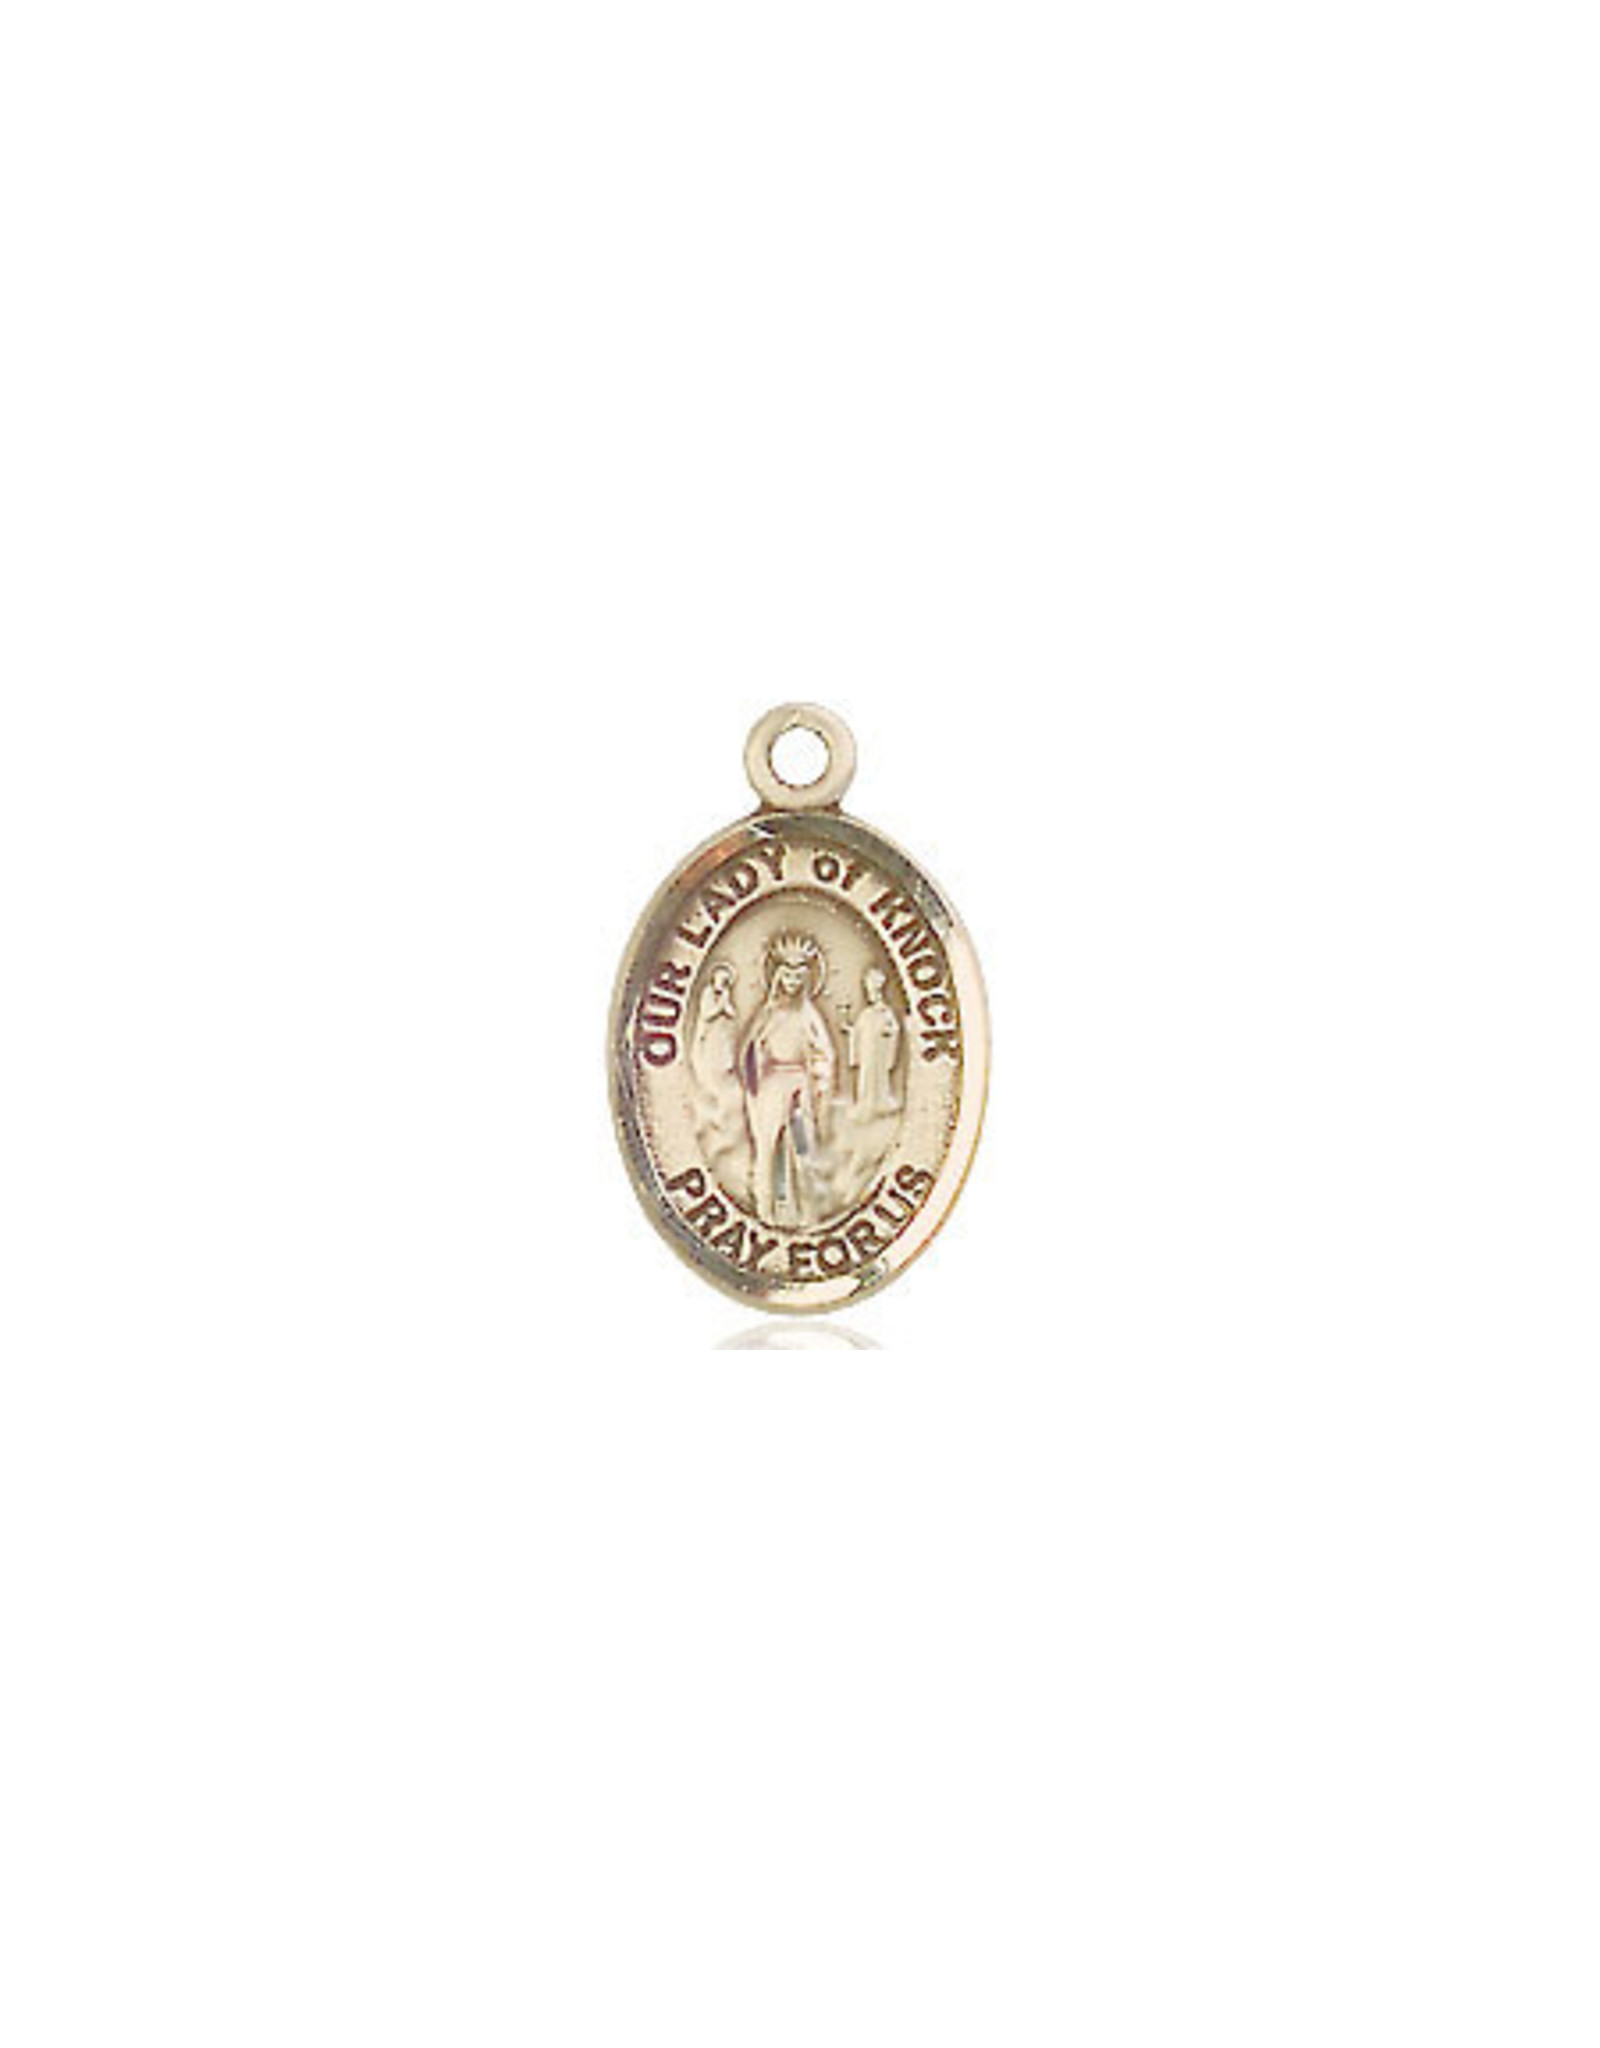 Our Lady of Knock Medal, 14kt Gold (1/2 x 1/4")